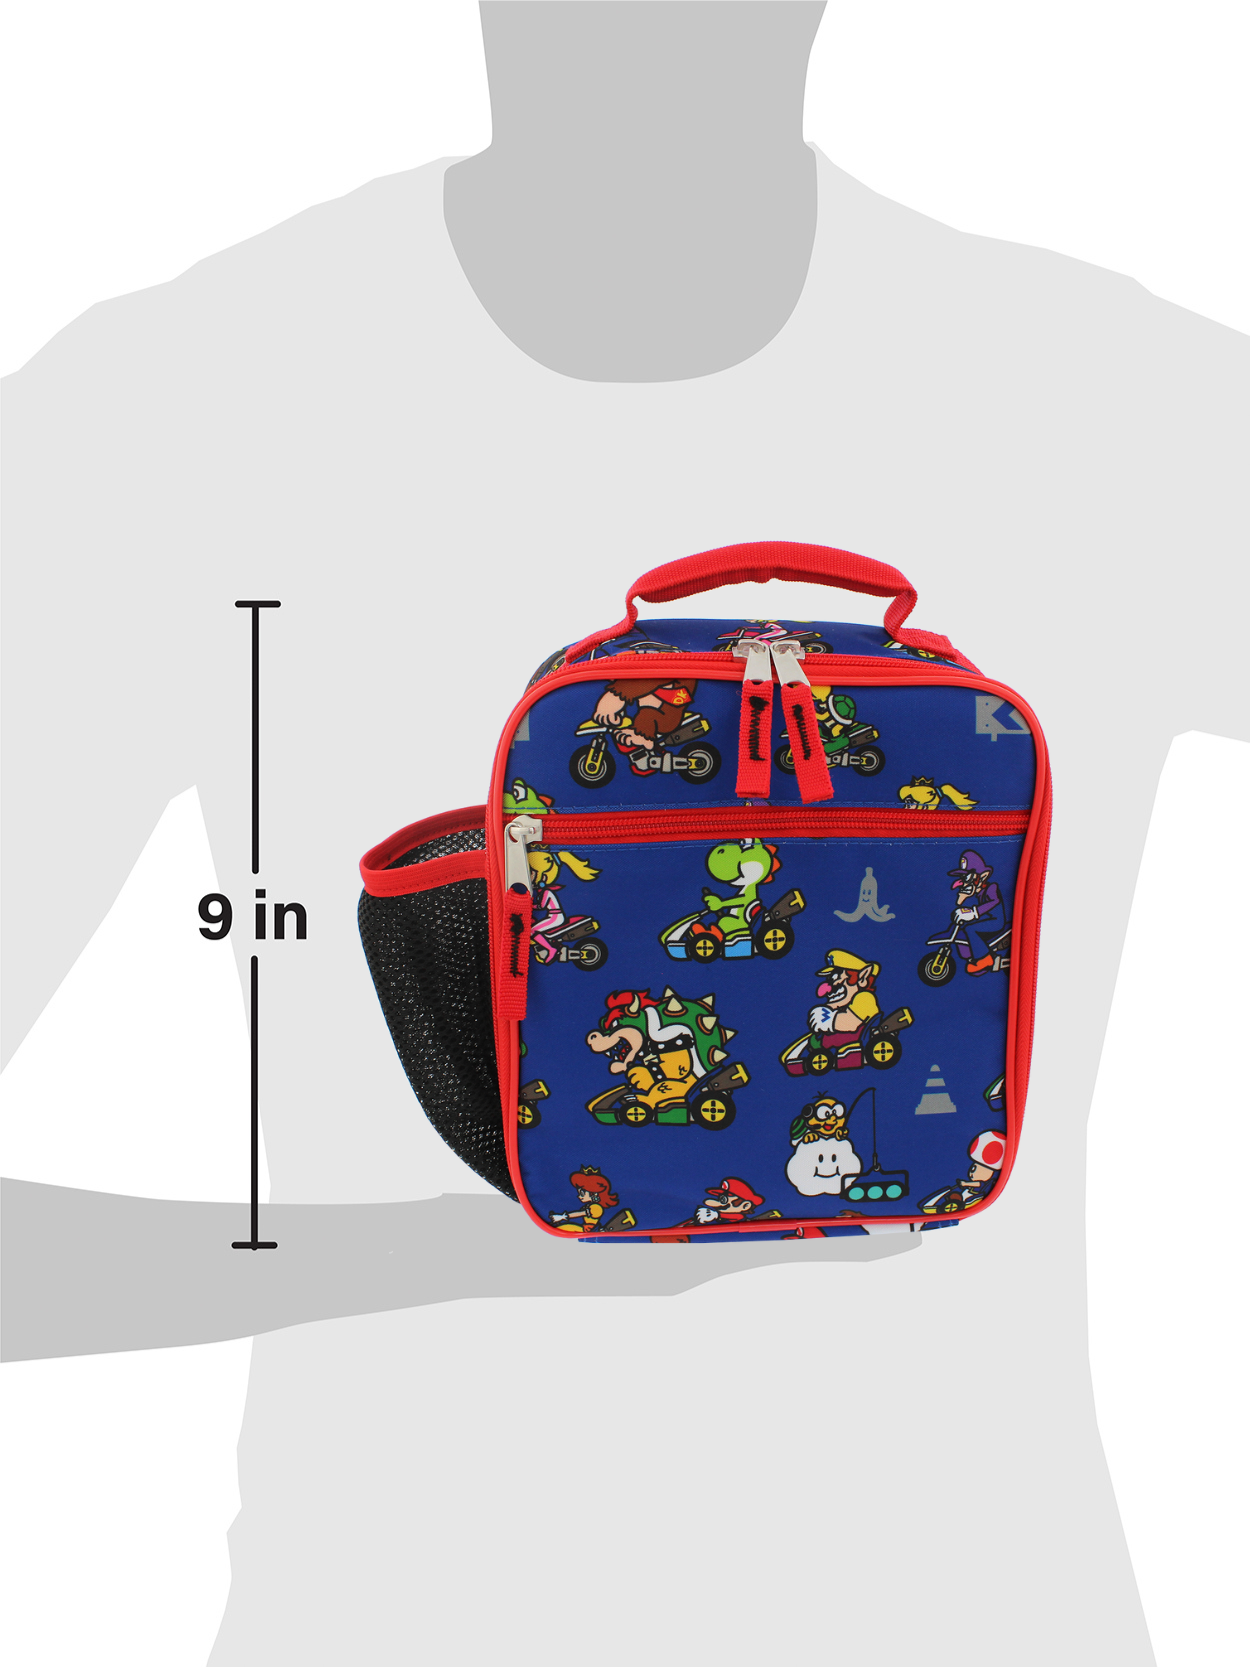  Super Mario Luigi Toad Yoshi Insulated Lunch Box Soft Kit  Cooler: Home & Kitchen